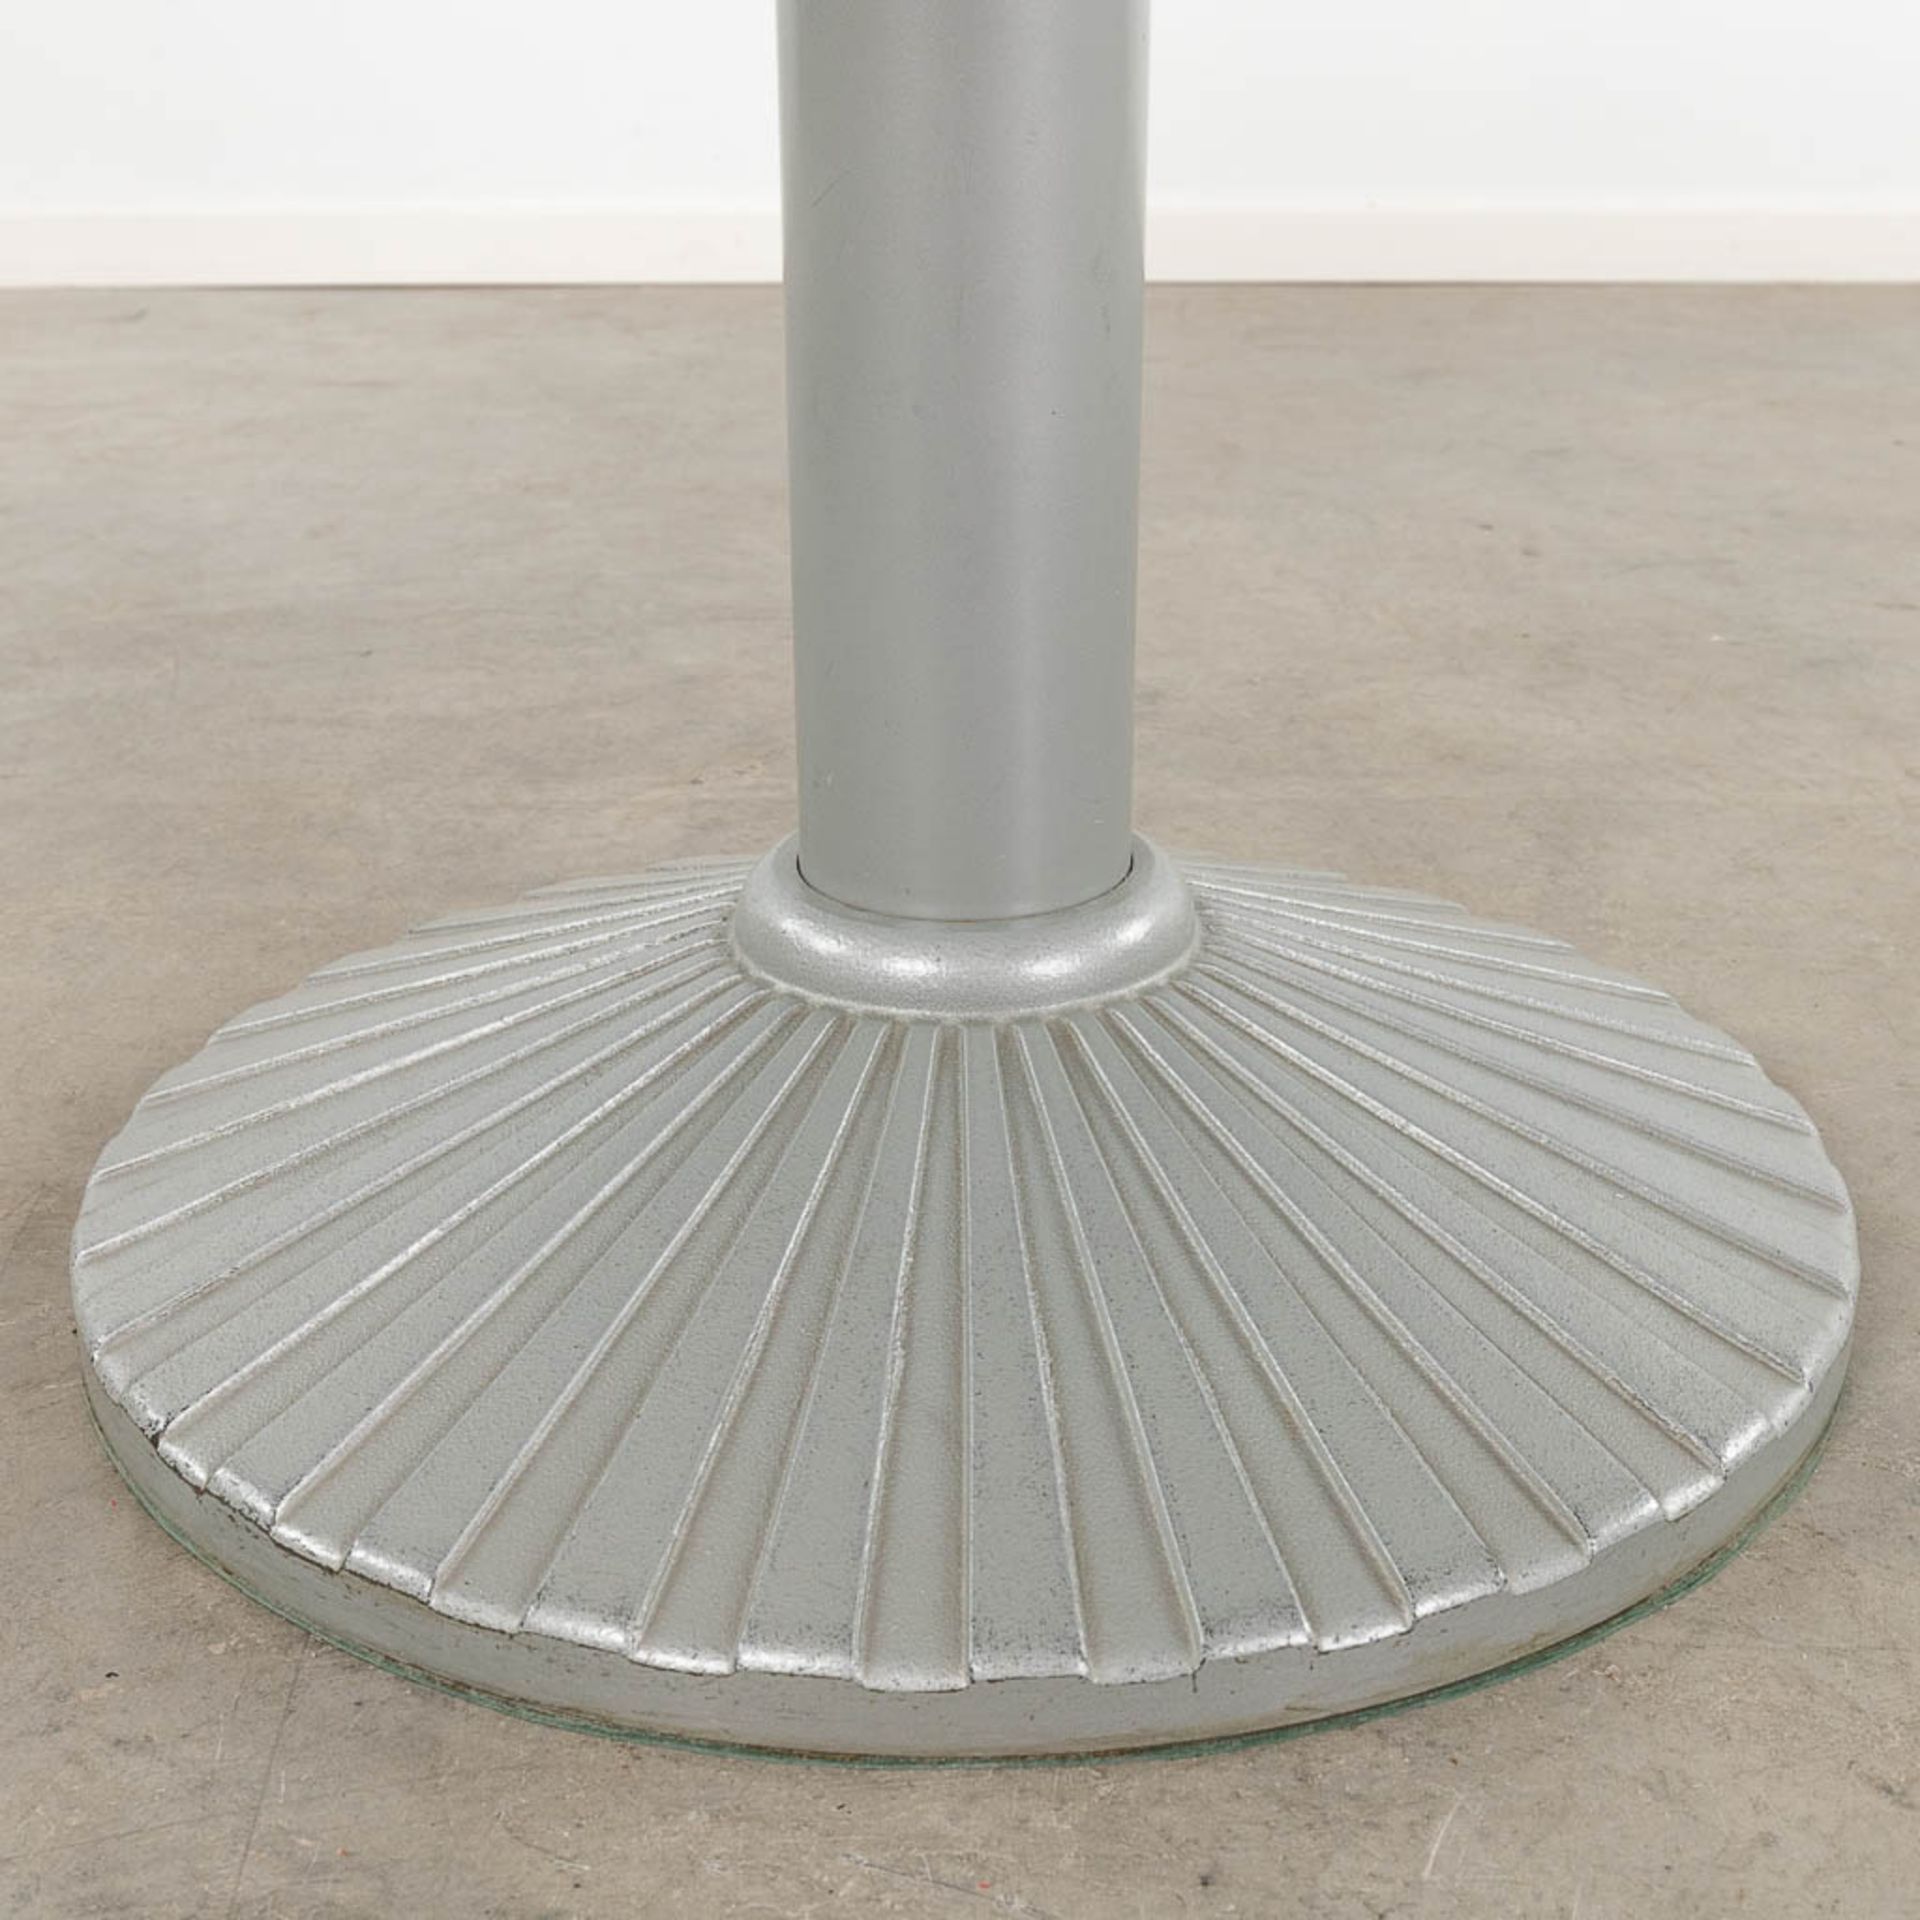 Peter NOEVER (XX-XXI) 'Round Table' for Zanotta. (H:73 x D:128 cm) - Image 5 of 9